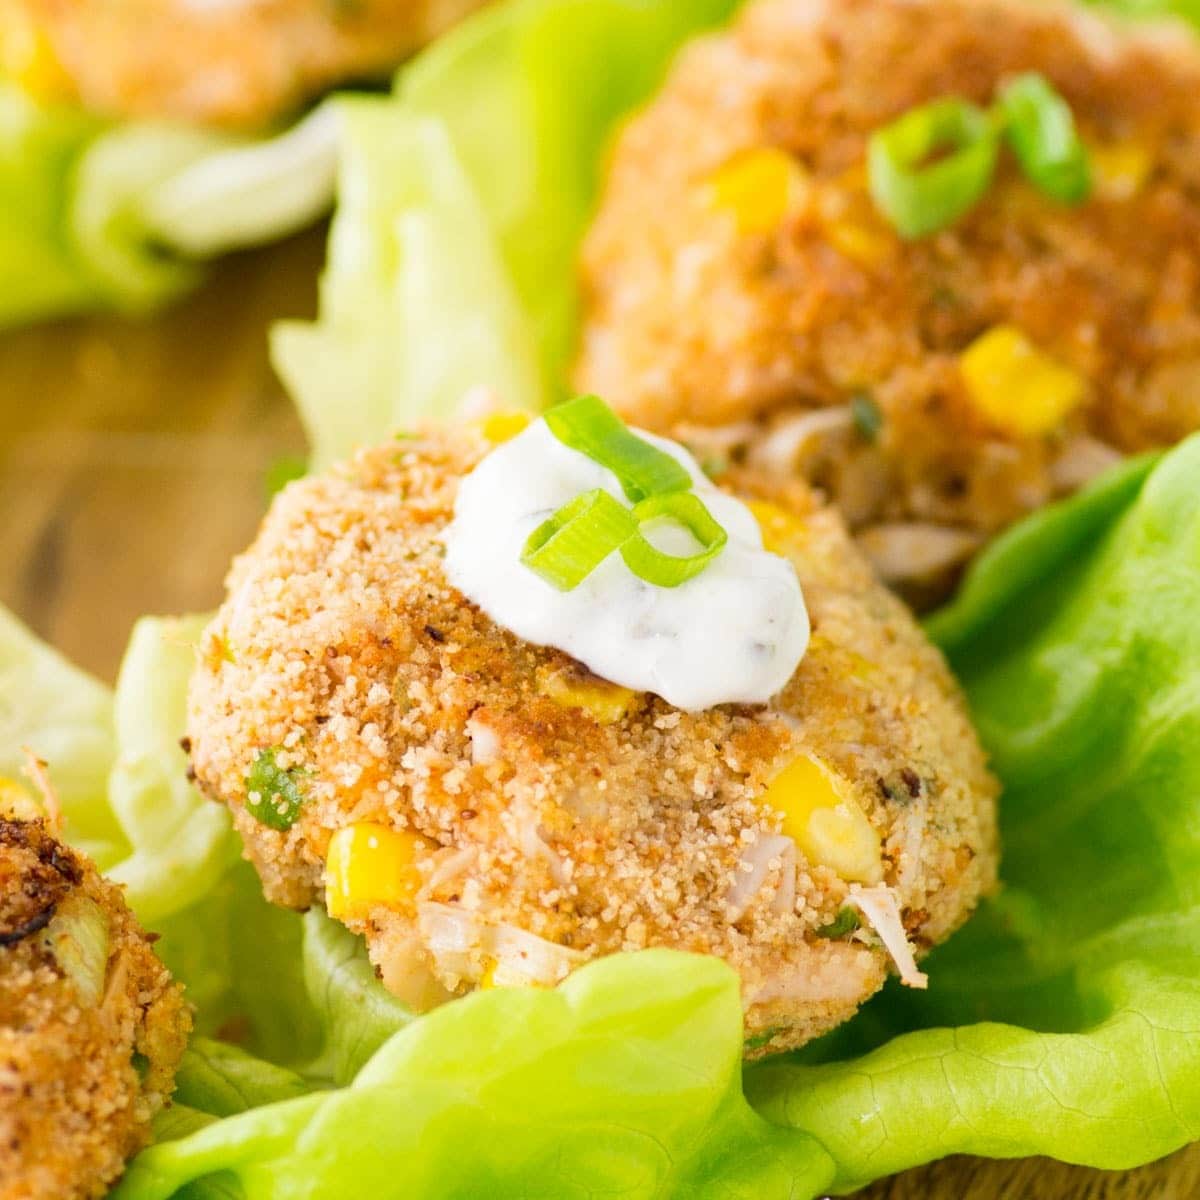 Crab cakes stuffed with jackfruit served on lettuce topped with cream.